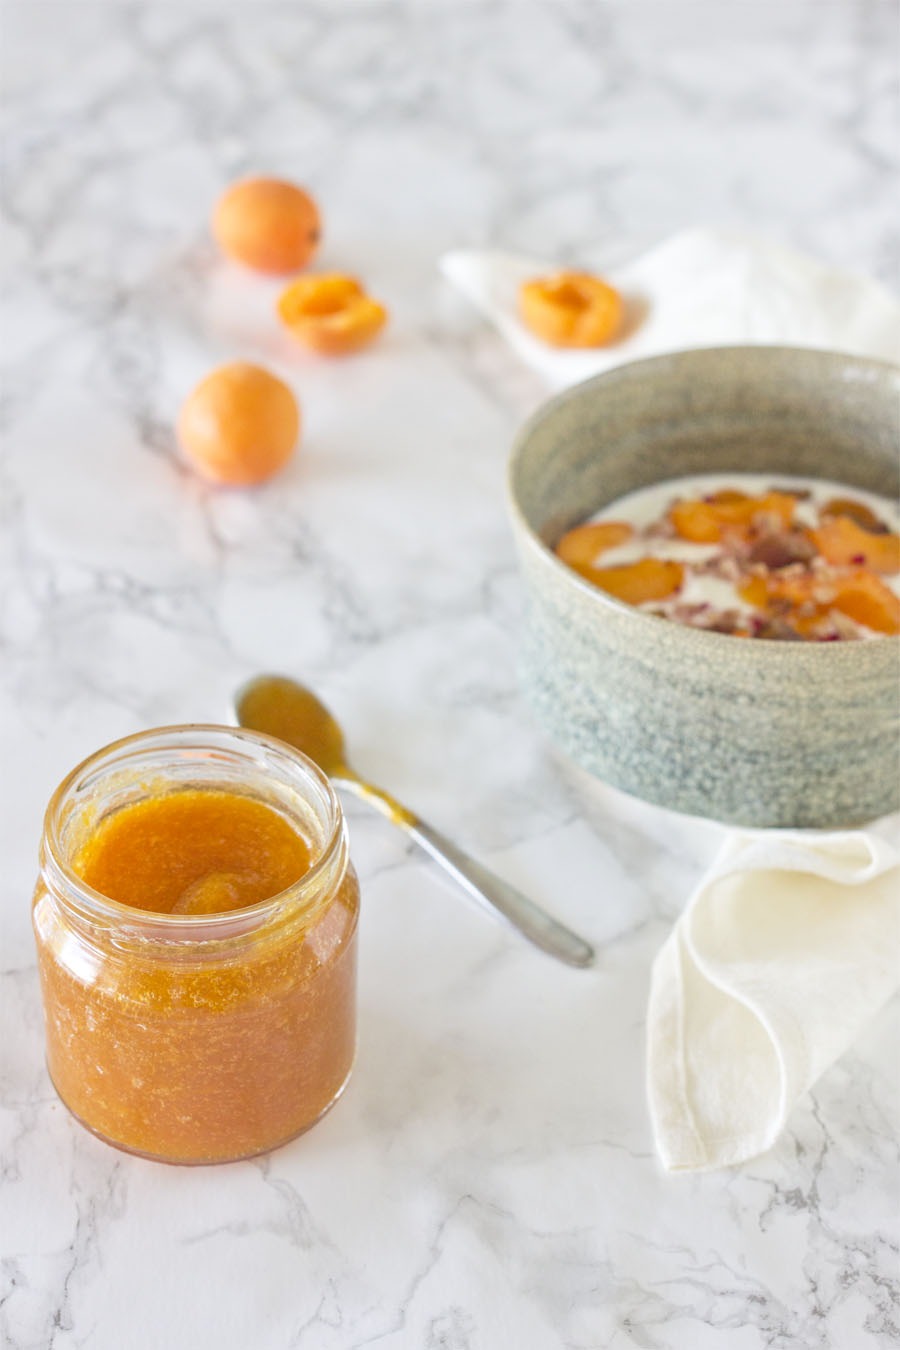 Apricot jam breakfast bowl recipe | LOOK WHAT I MADE ...